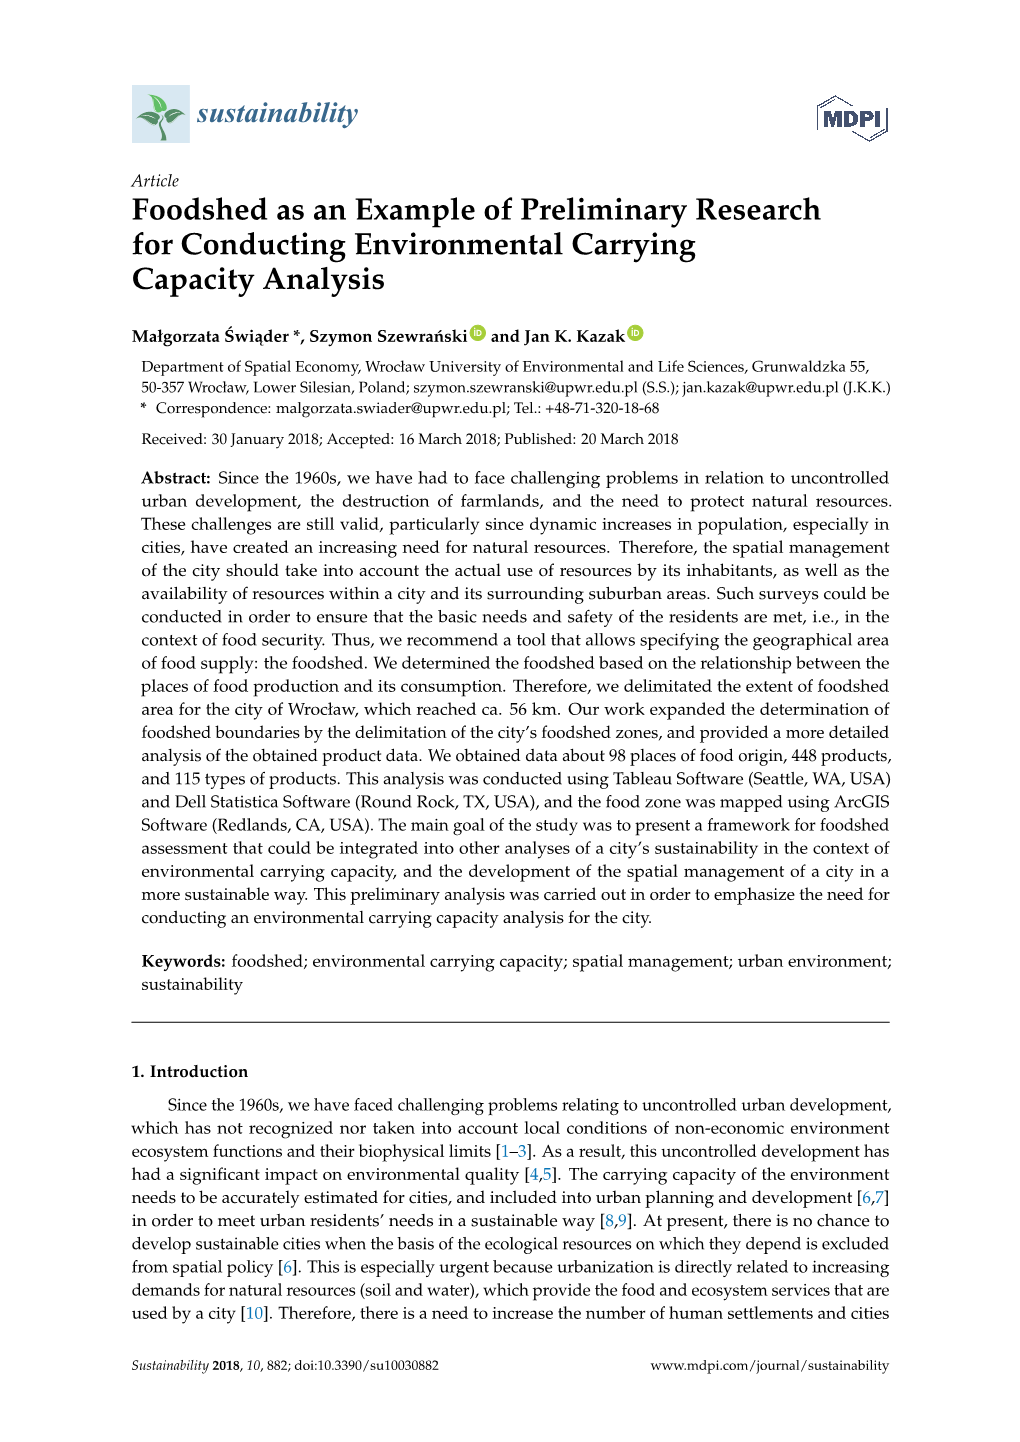 Foodshed As an Example of Preliminary Research for Conducting Environmental Carrying Capacity Analysis